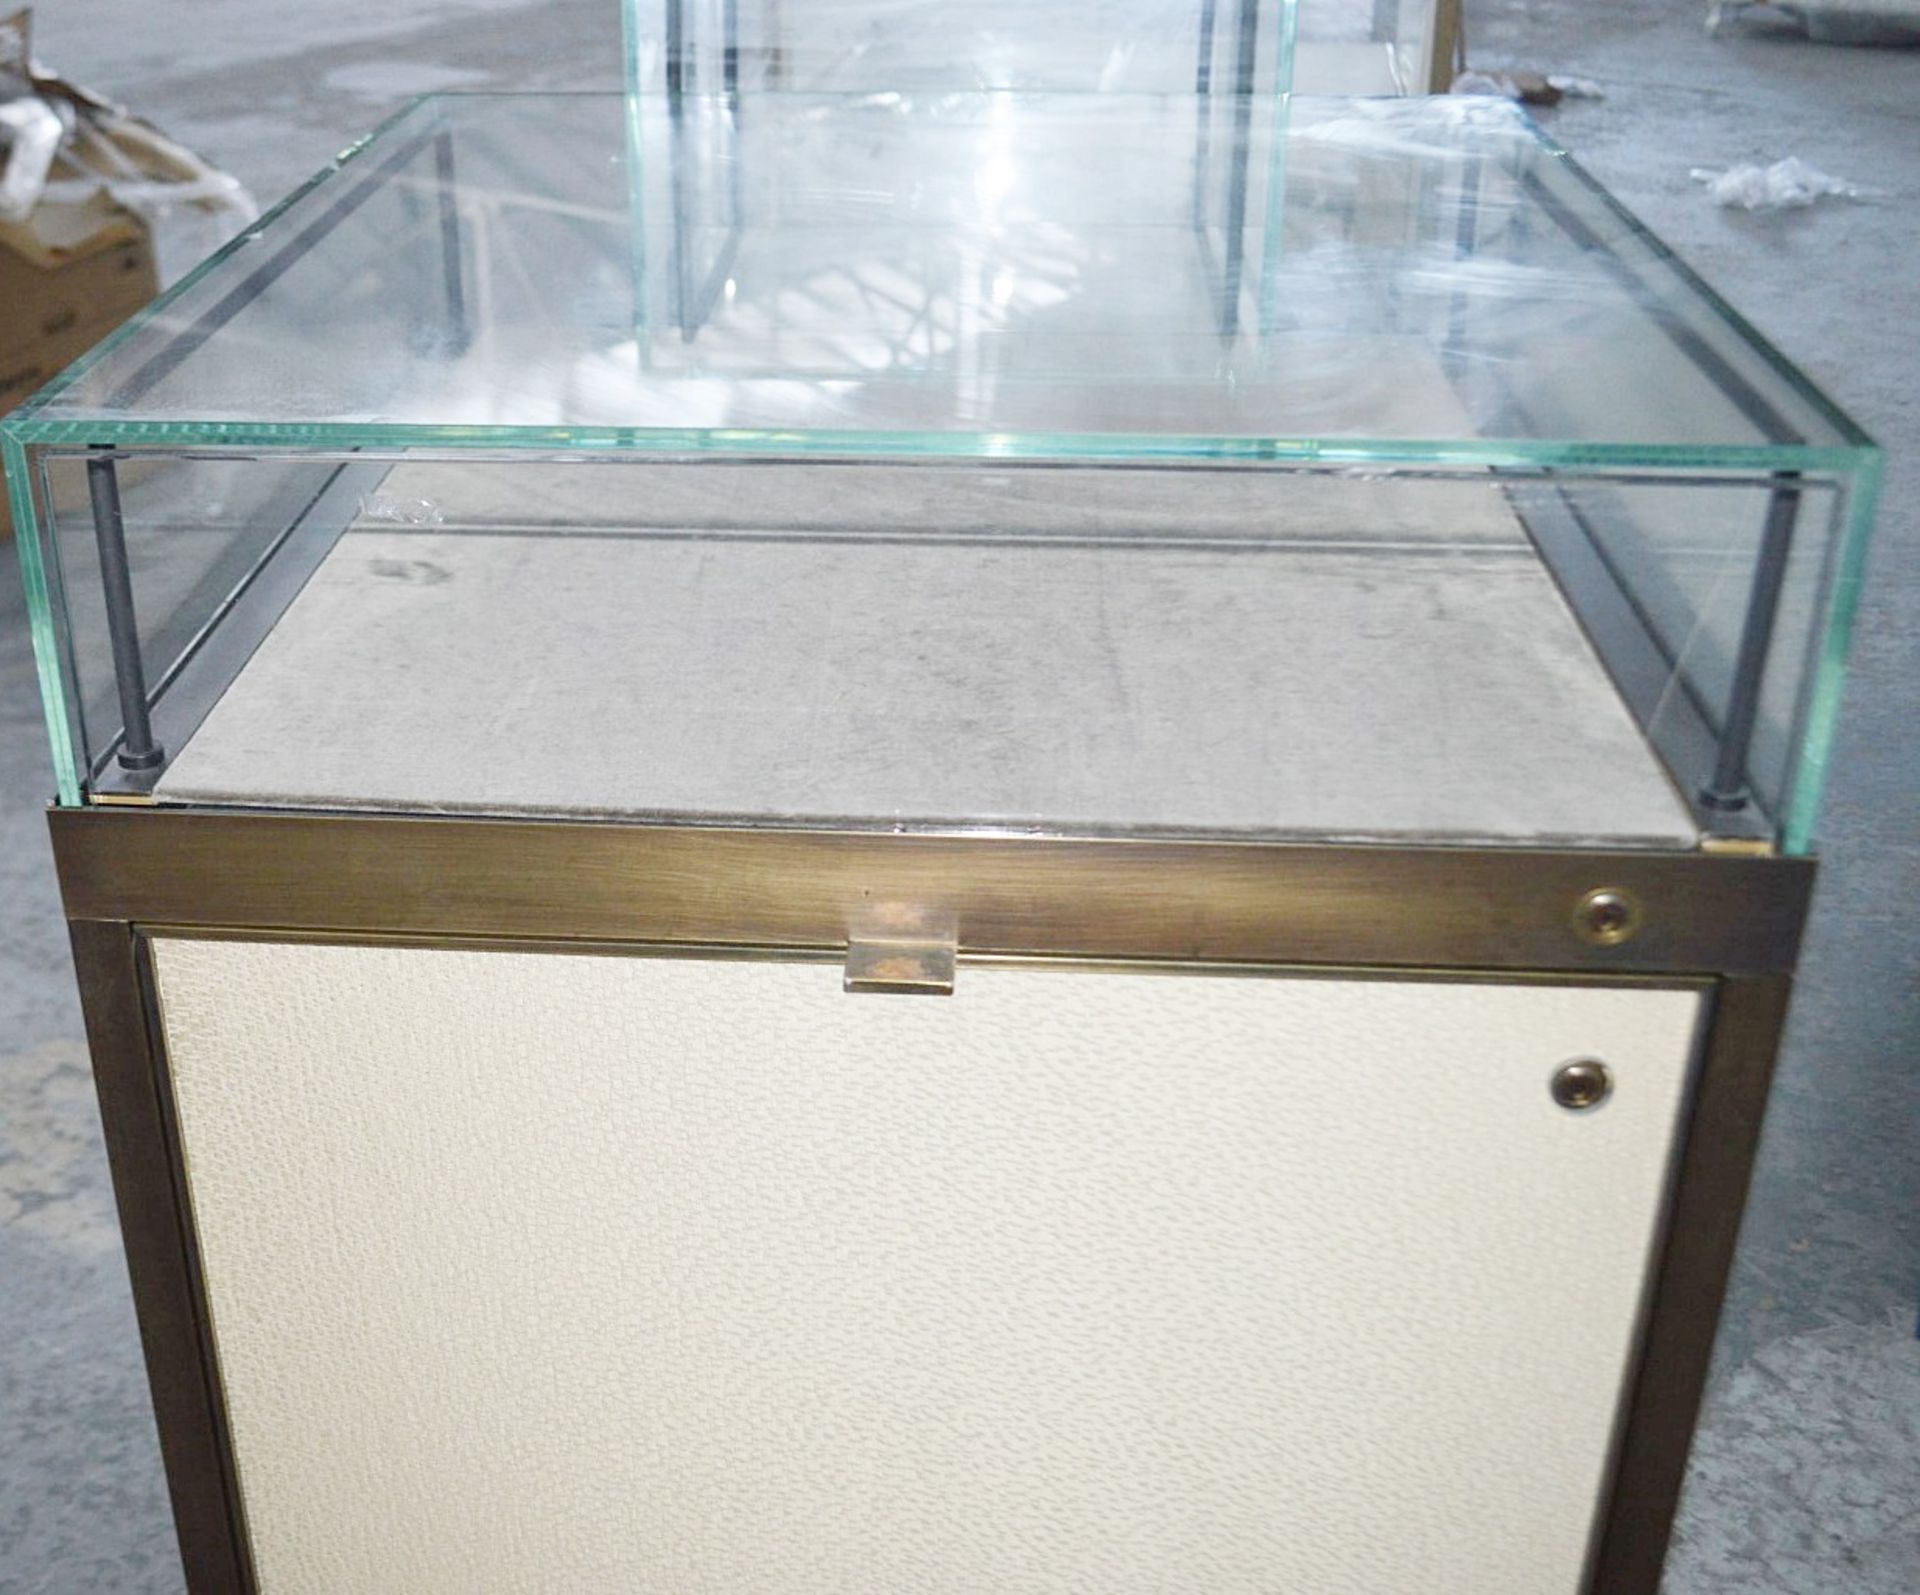 1 x Luxury Double Cabinet Glass Display Case - Dimensions: H124 x W100 x D65cm - Ex-Showroom Piece - Image 6 of 9